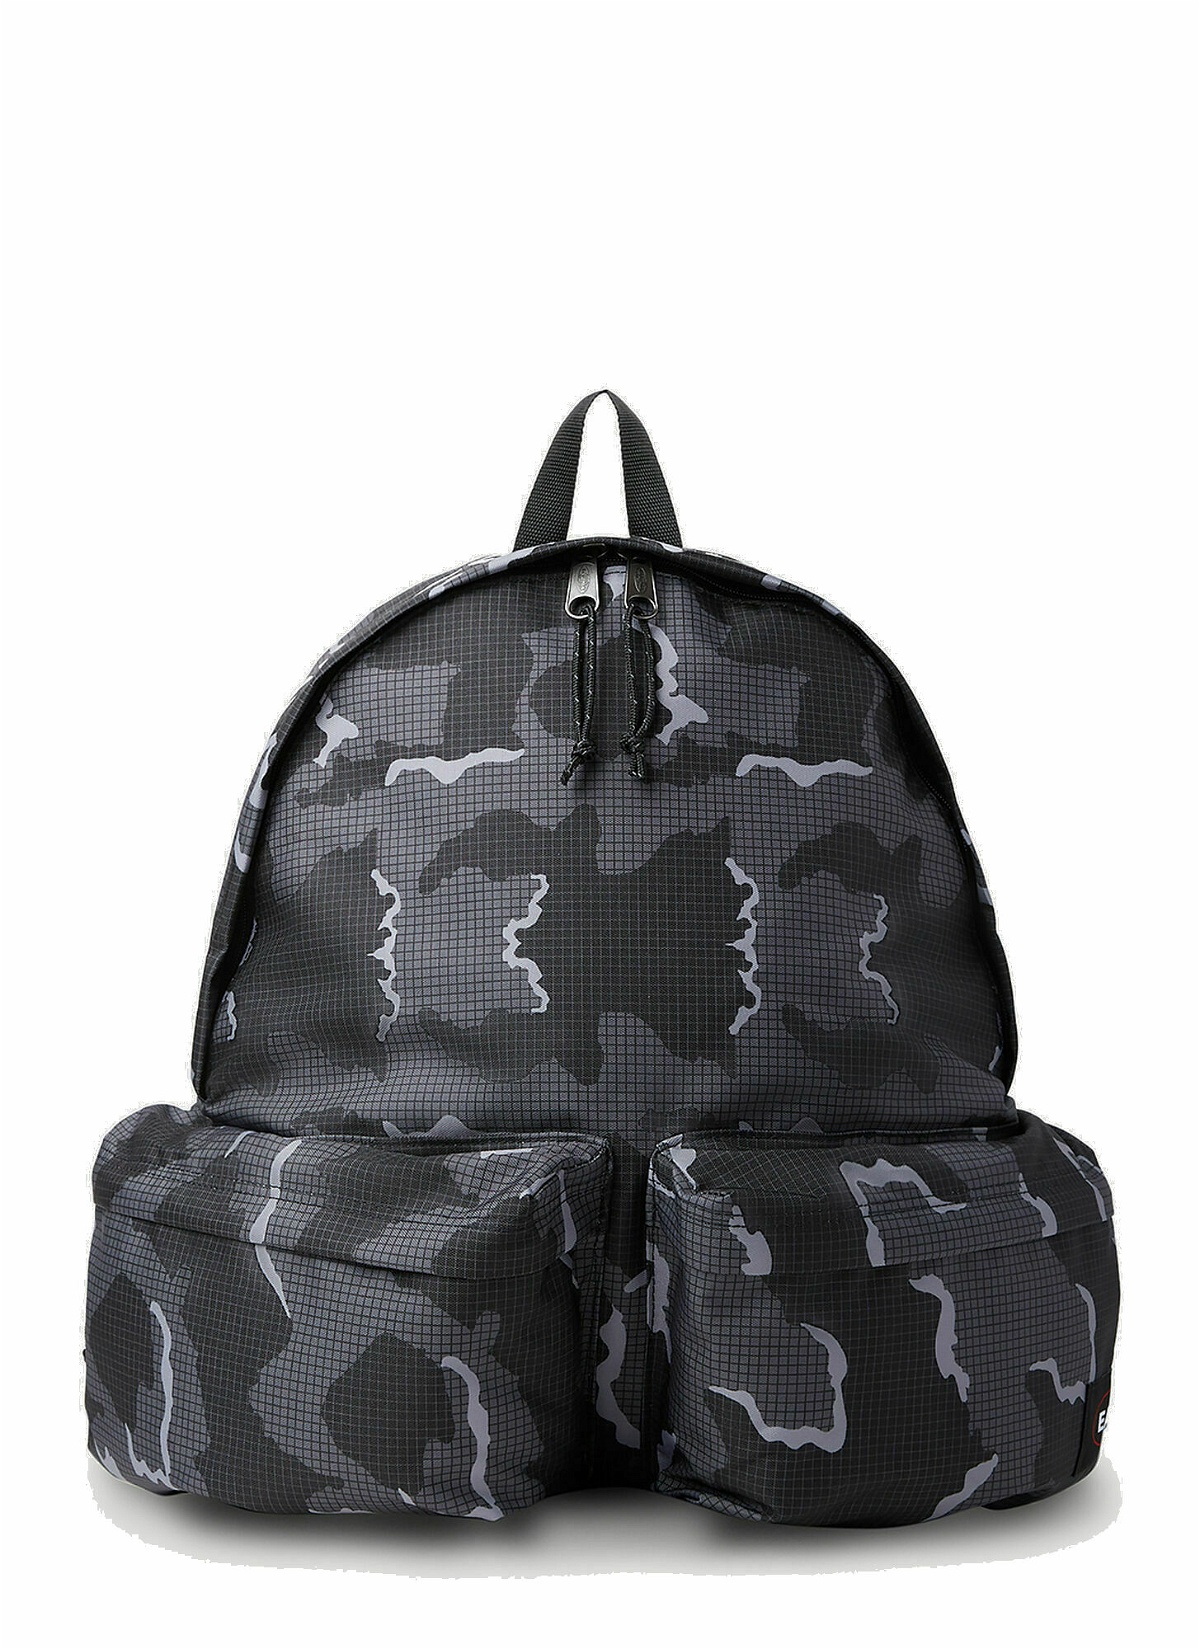 Photo: Eastpak x UNDERCOVER - Camouflage Backpack in Black